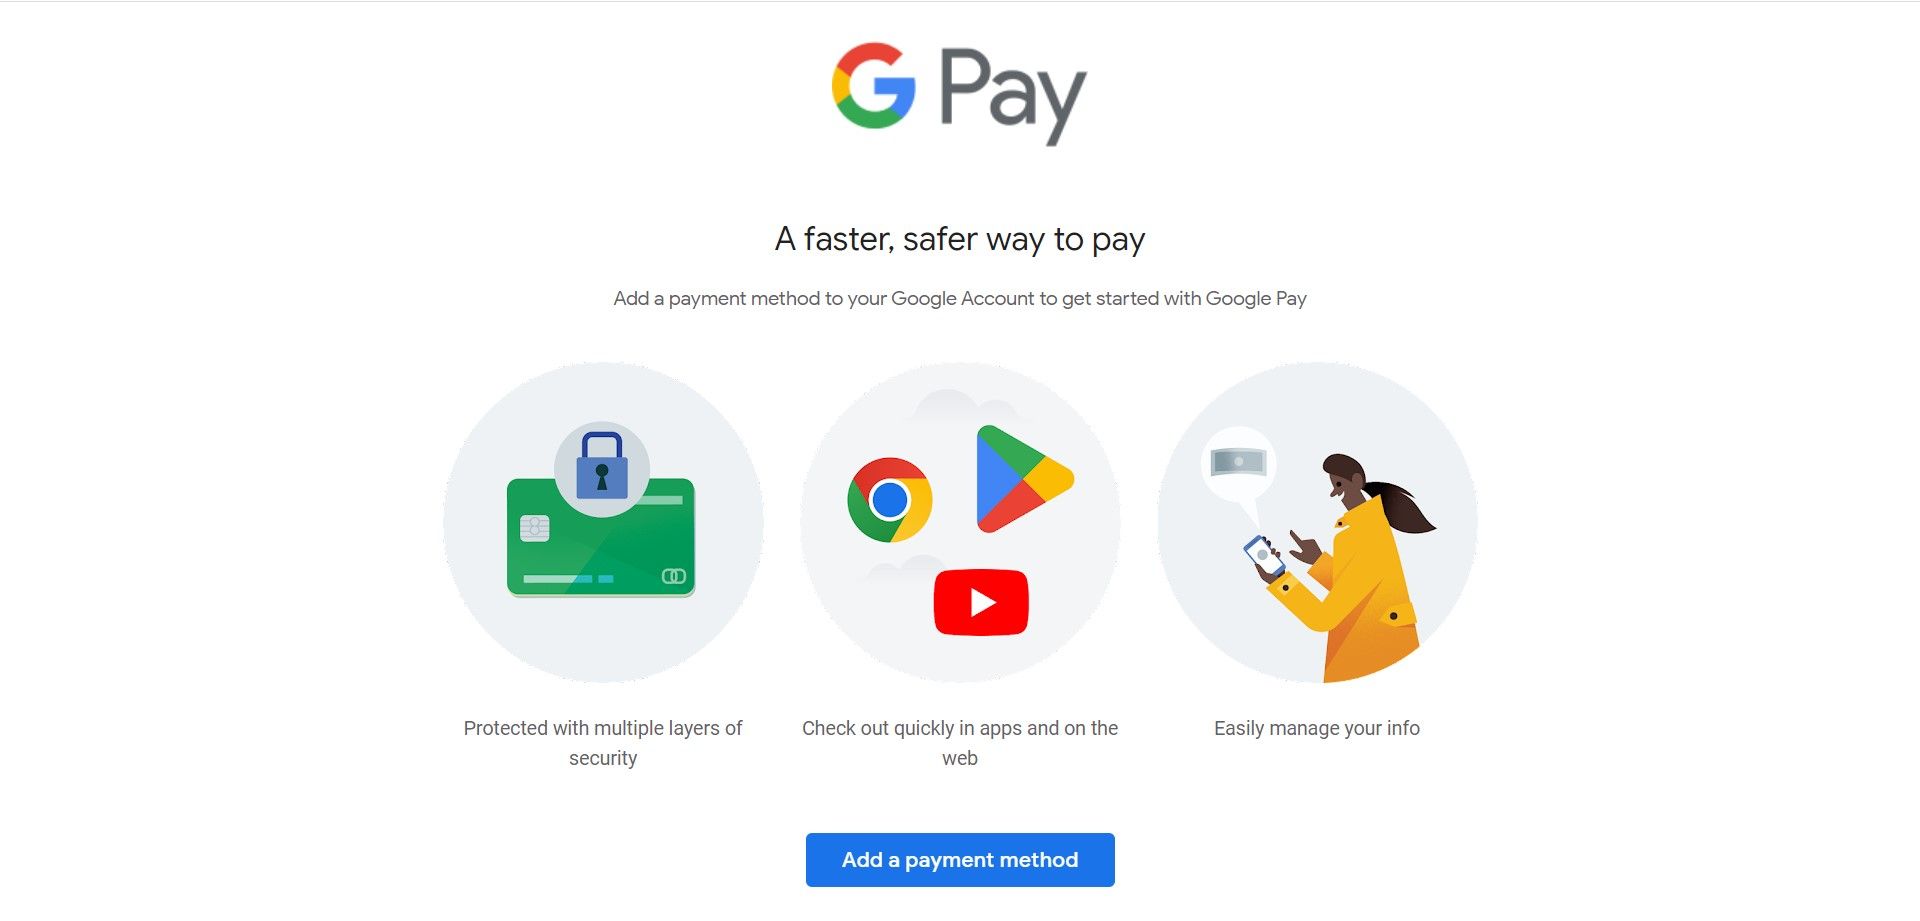 The Google Pay home page